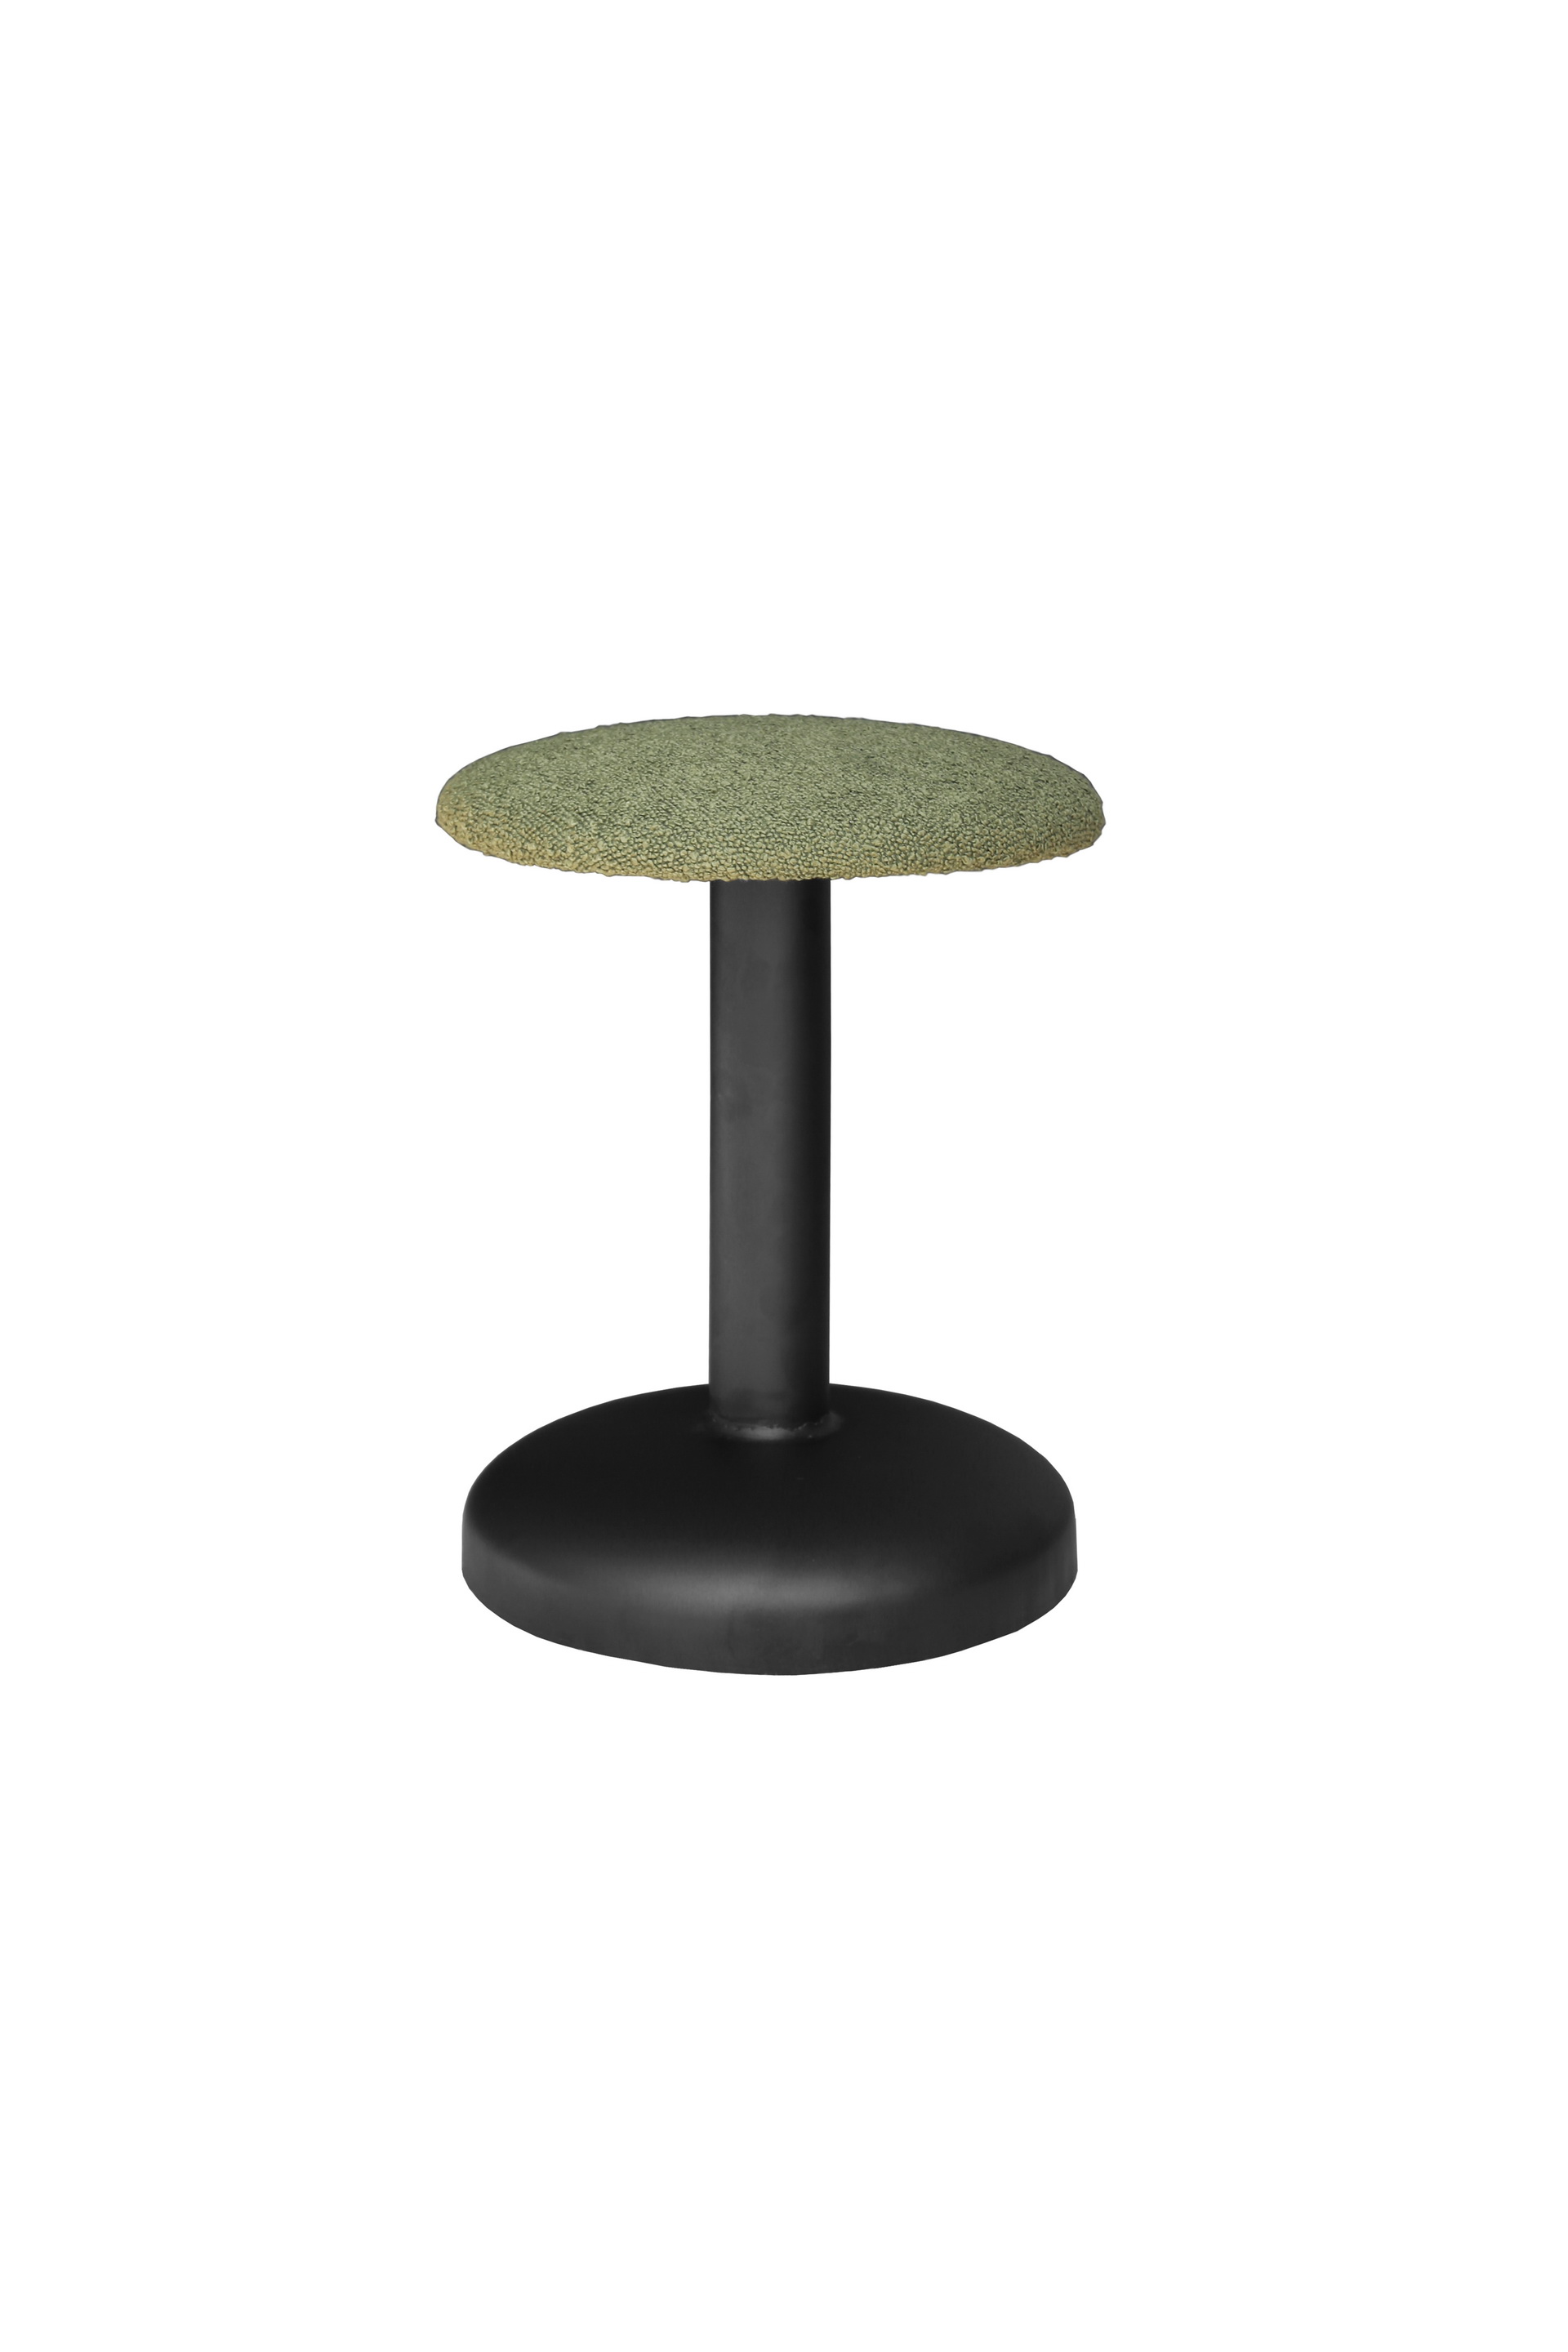  FE006 Iron stool with fabric seat